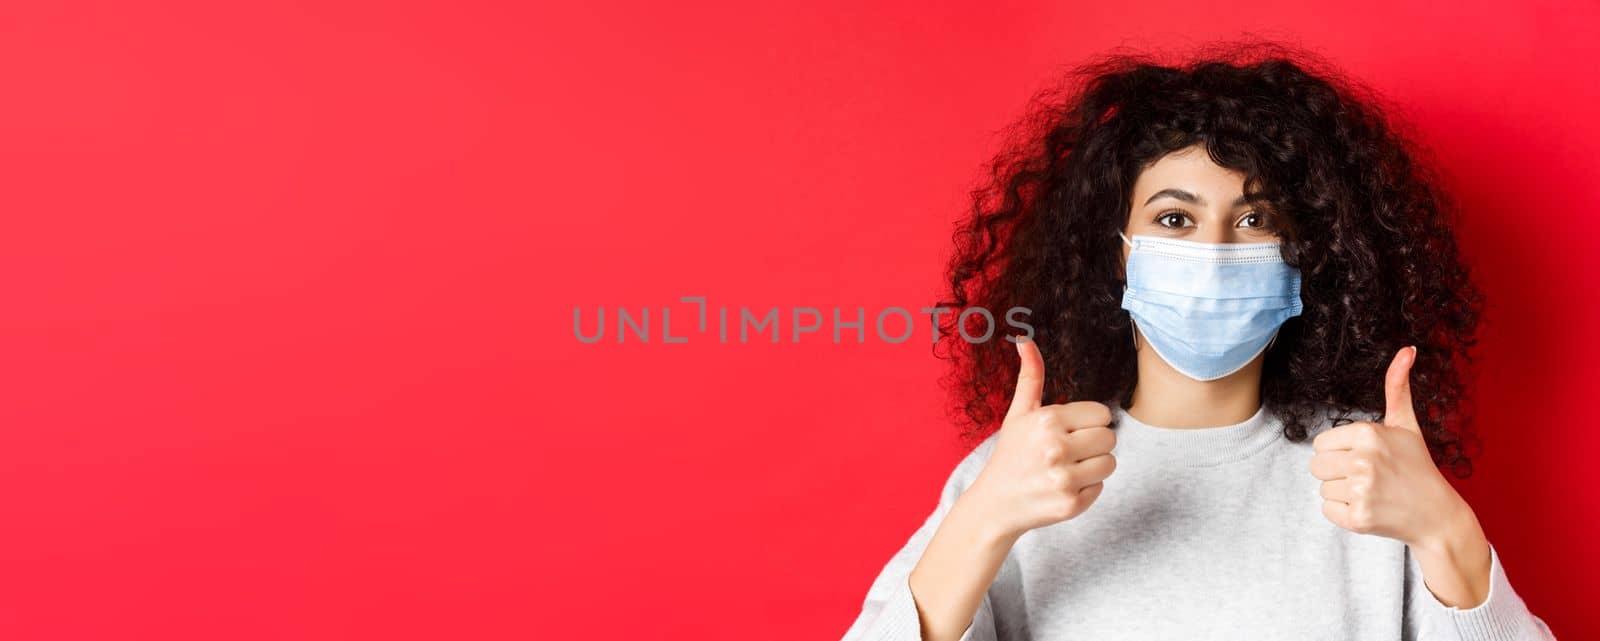 Covid-19 and pandemic concept. Close-up of young curly woman in face mask showing thumbs up, like and praise good thing, standing on red background.